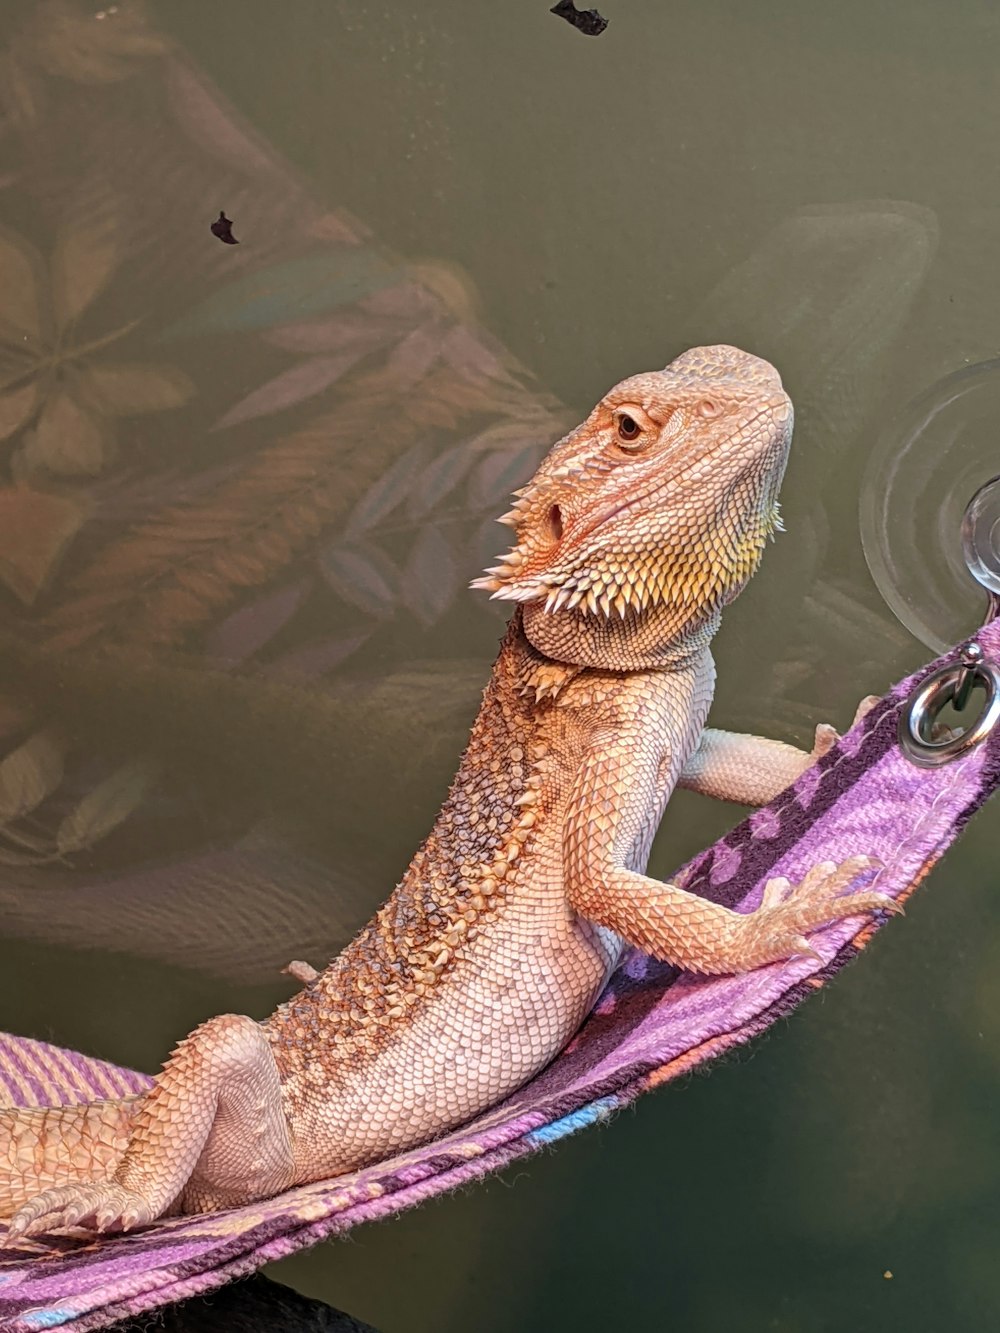 a lizard sitting on a towel in the water